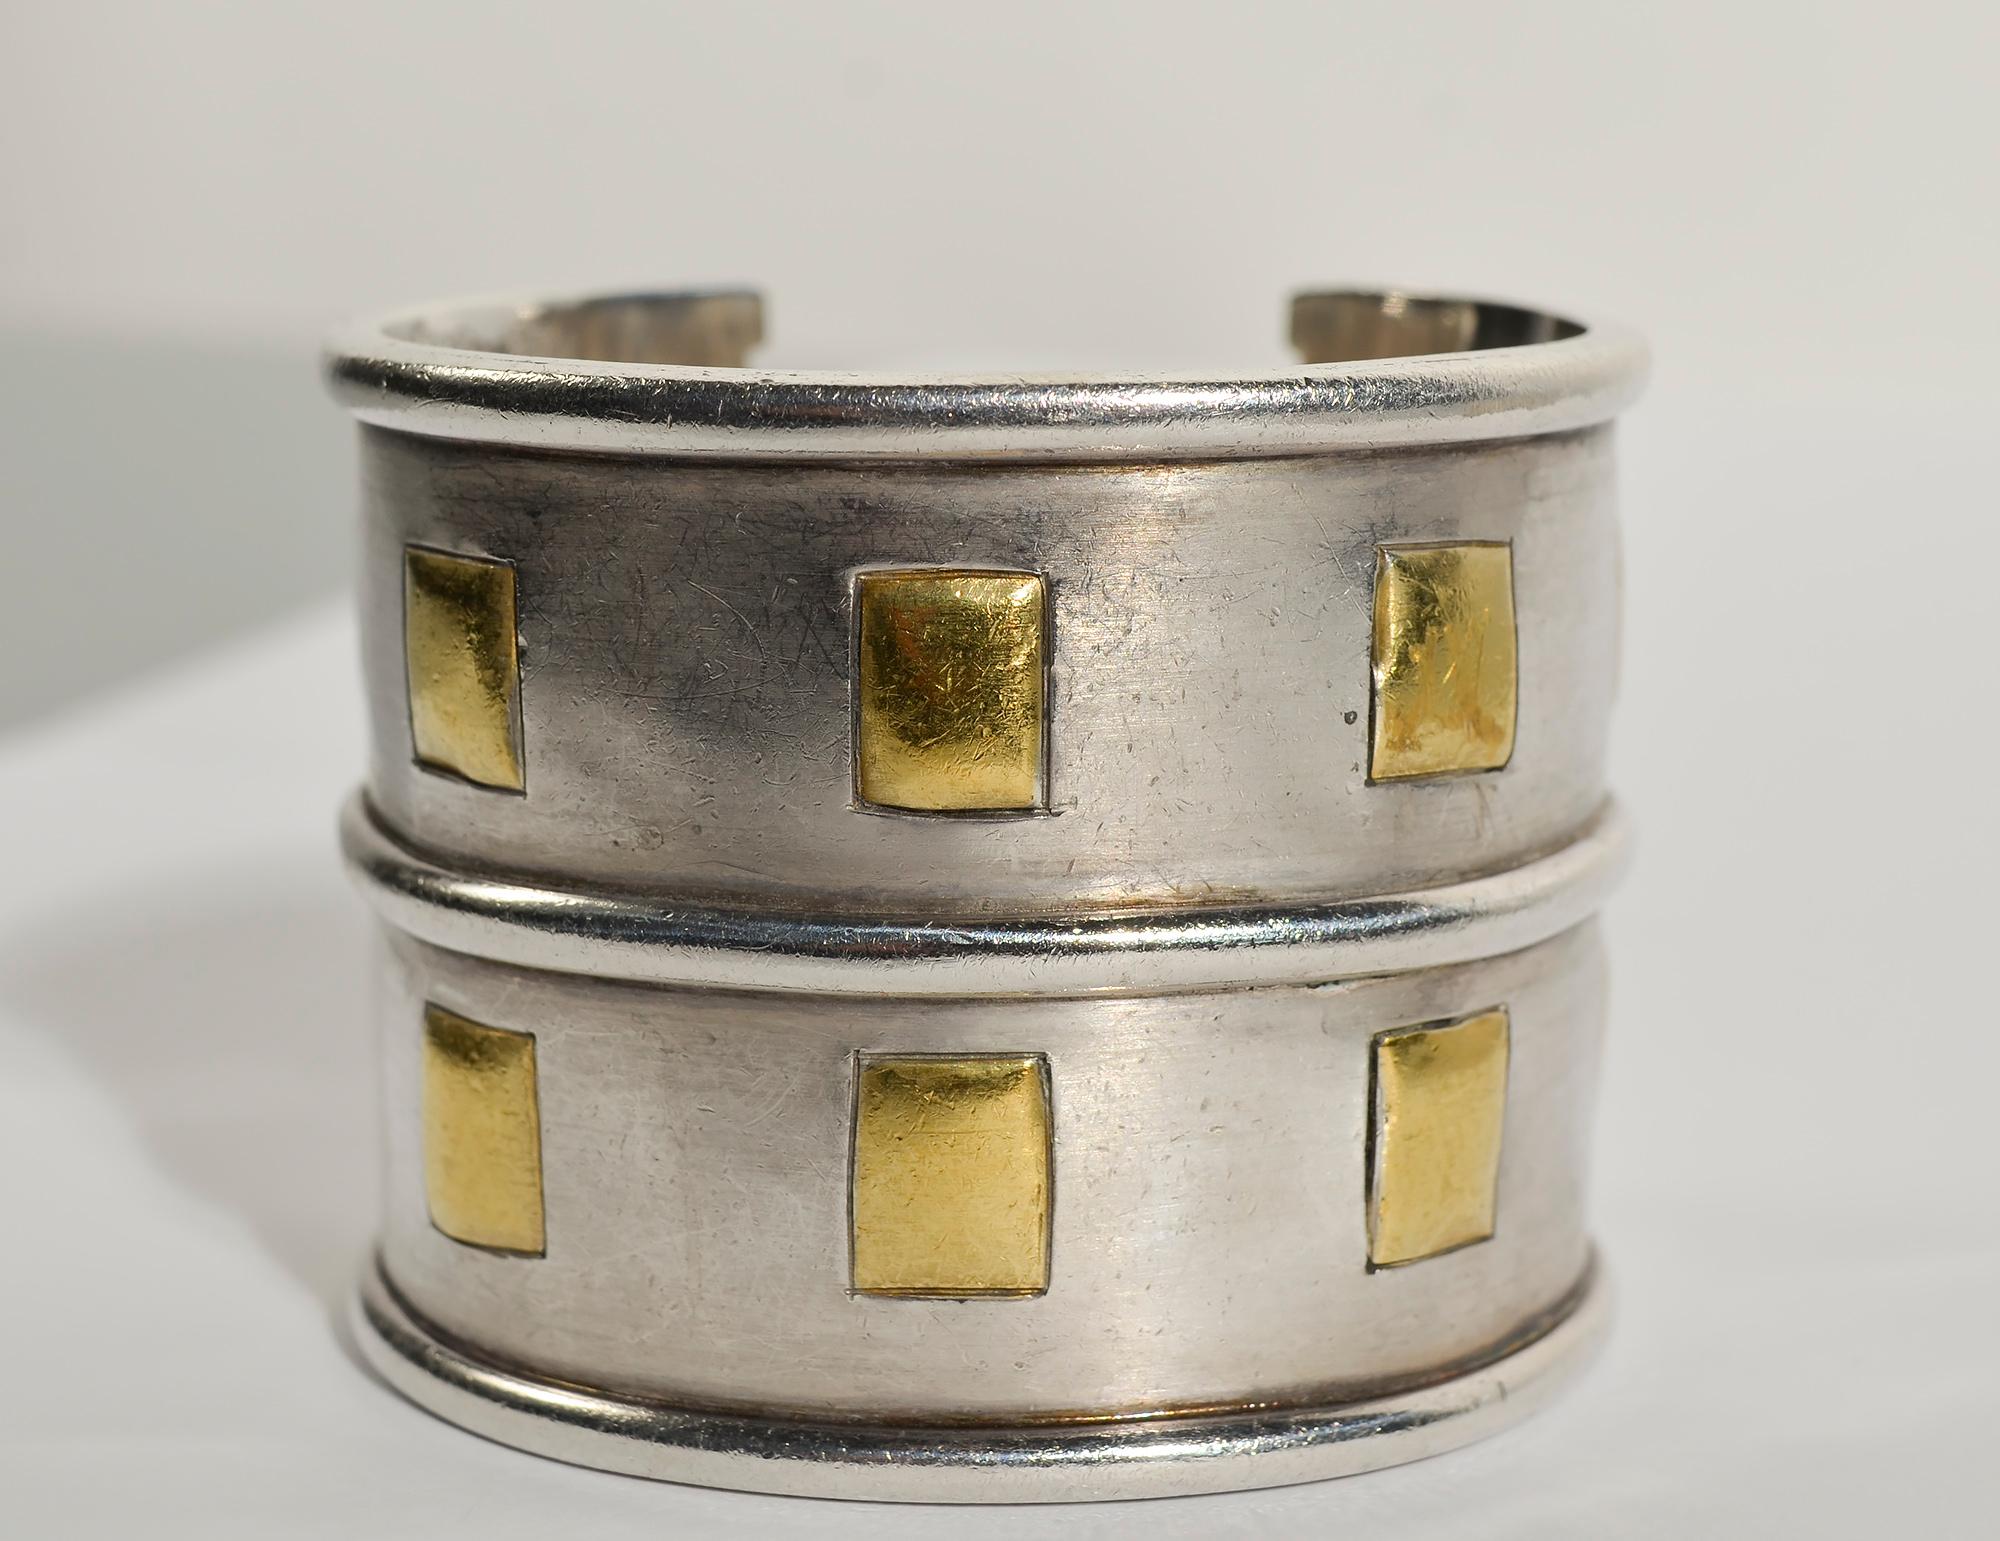 Wonderfully impactful cuff bracelet by Emilia Castillo. The body of the bracelet is sterling silver with a patchwork of squares of 24 karat gold. The bracelet is 2 inches wide. It measures 2 1/2 inches in diameter which can be adjusted to a slightly